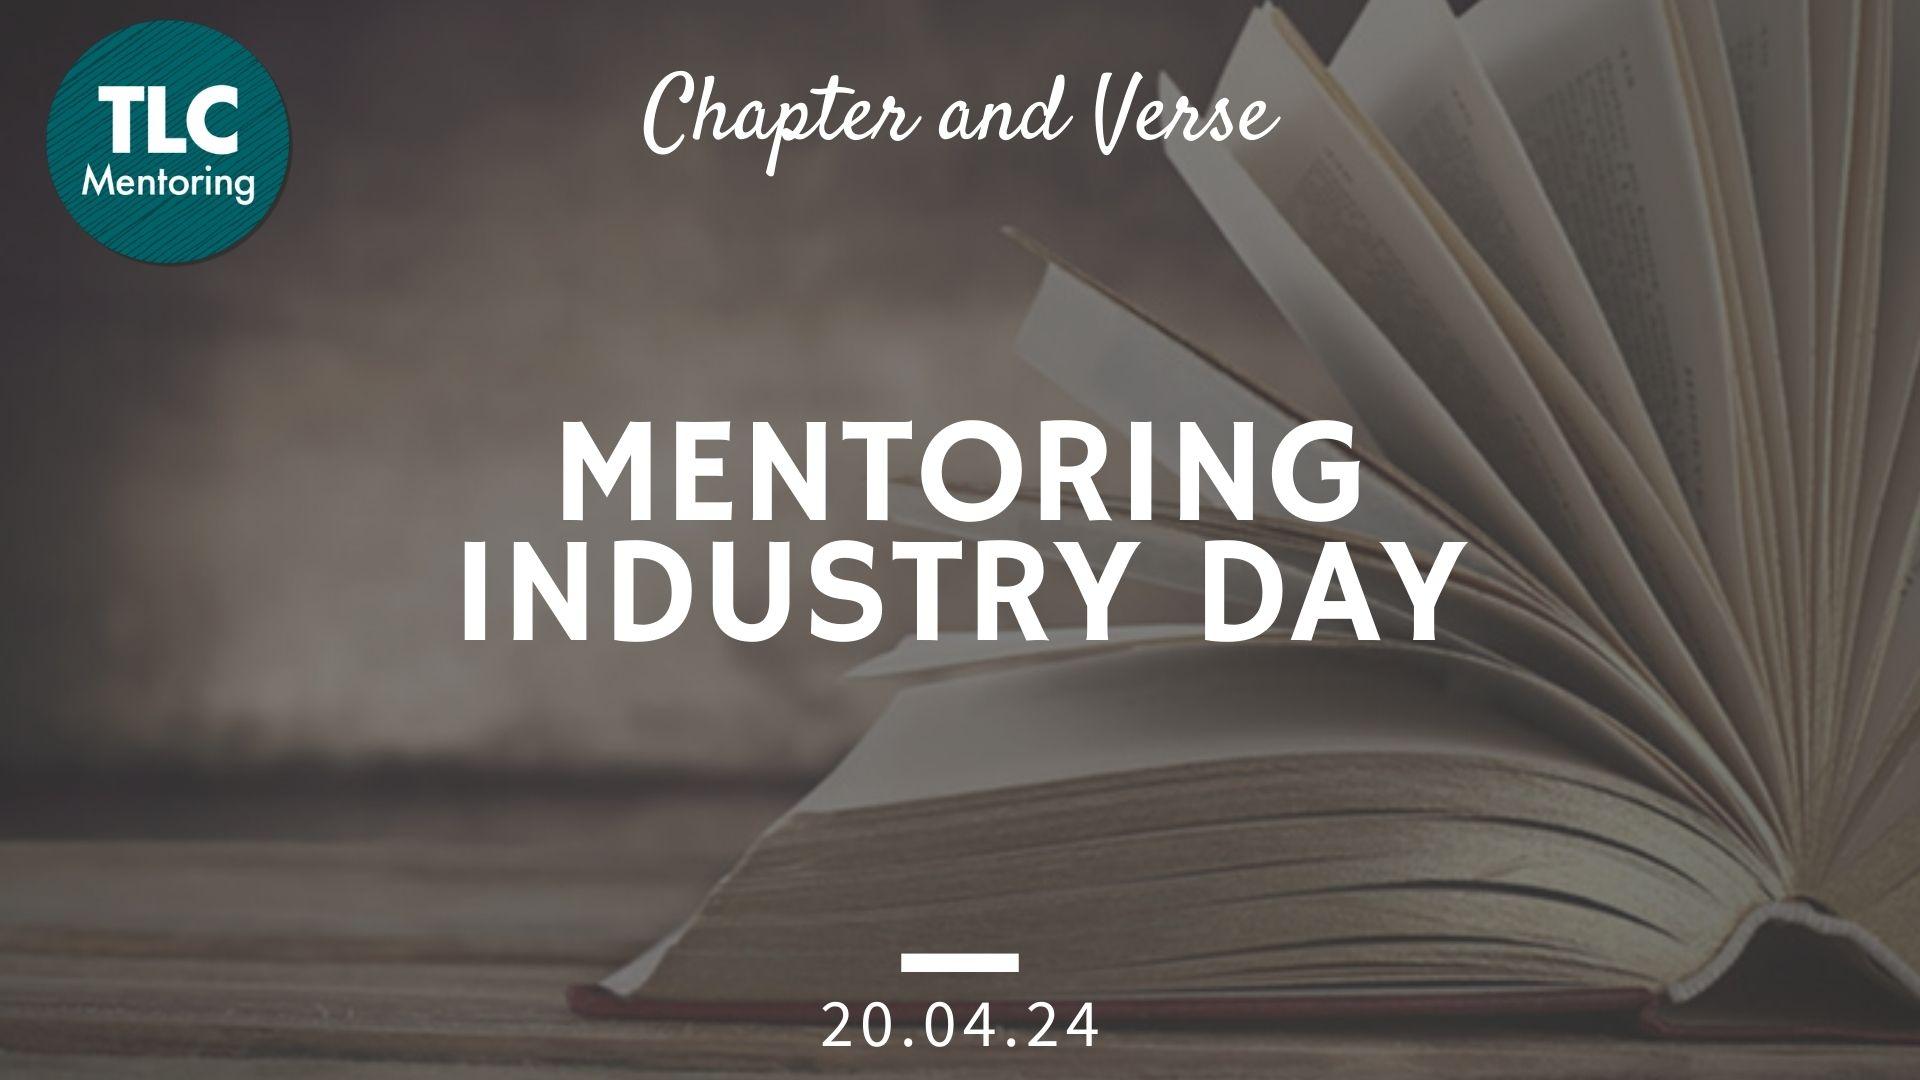 Digital poster for the TLC Mentoring Industry Day featuring an image of an open book